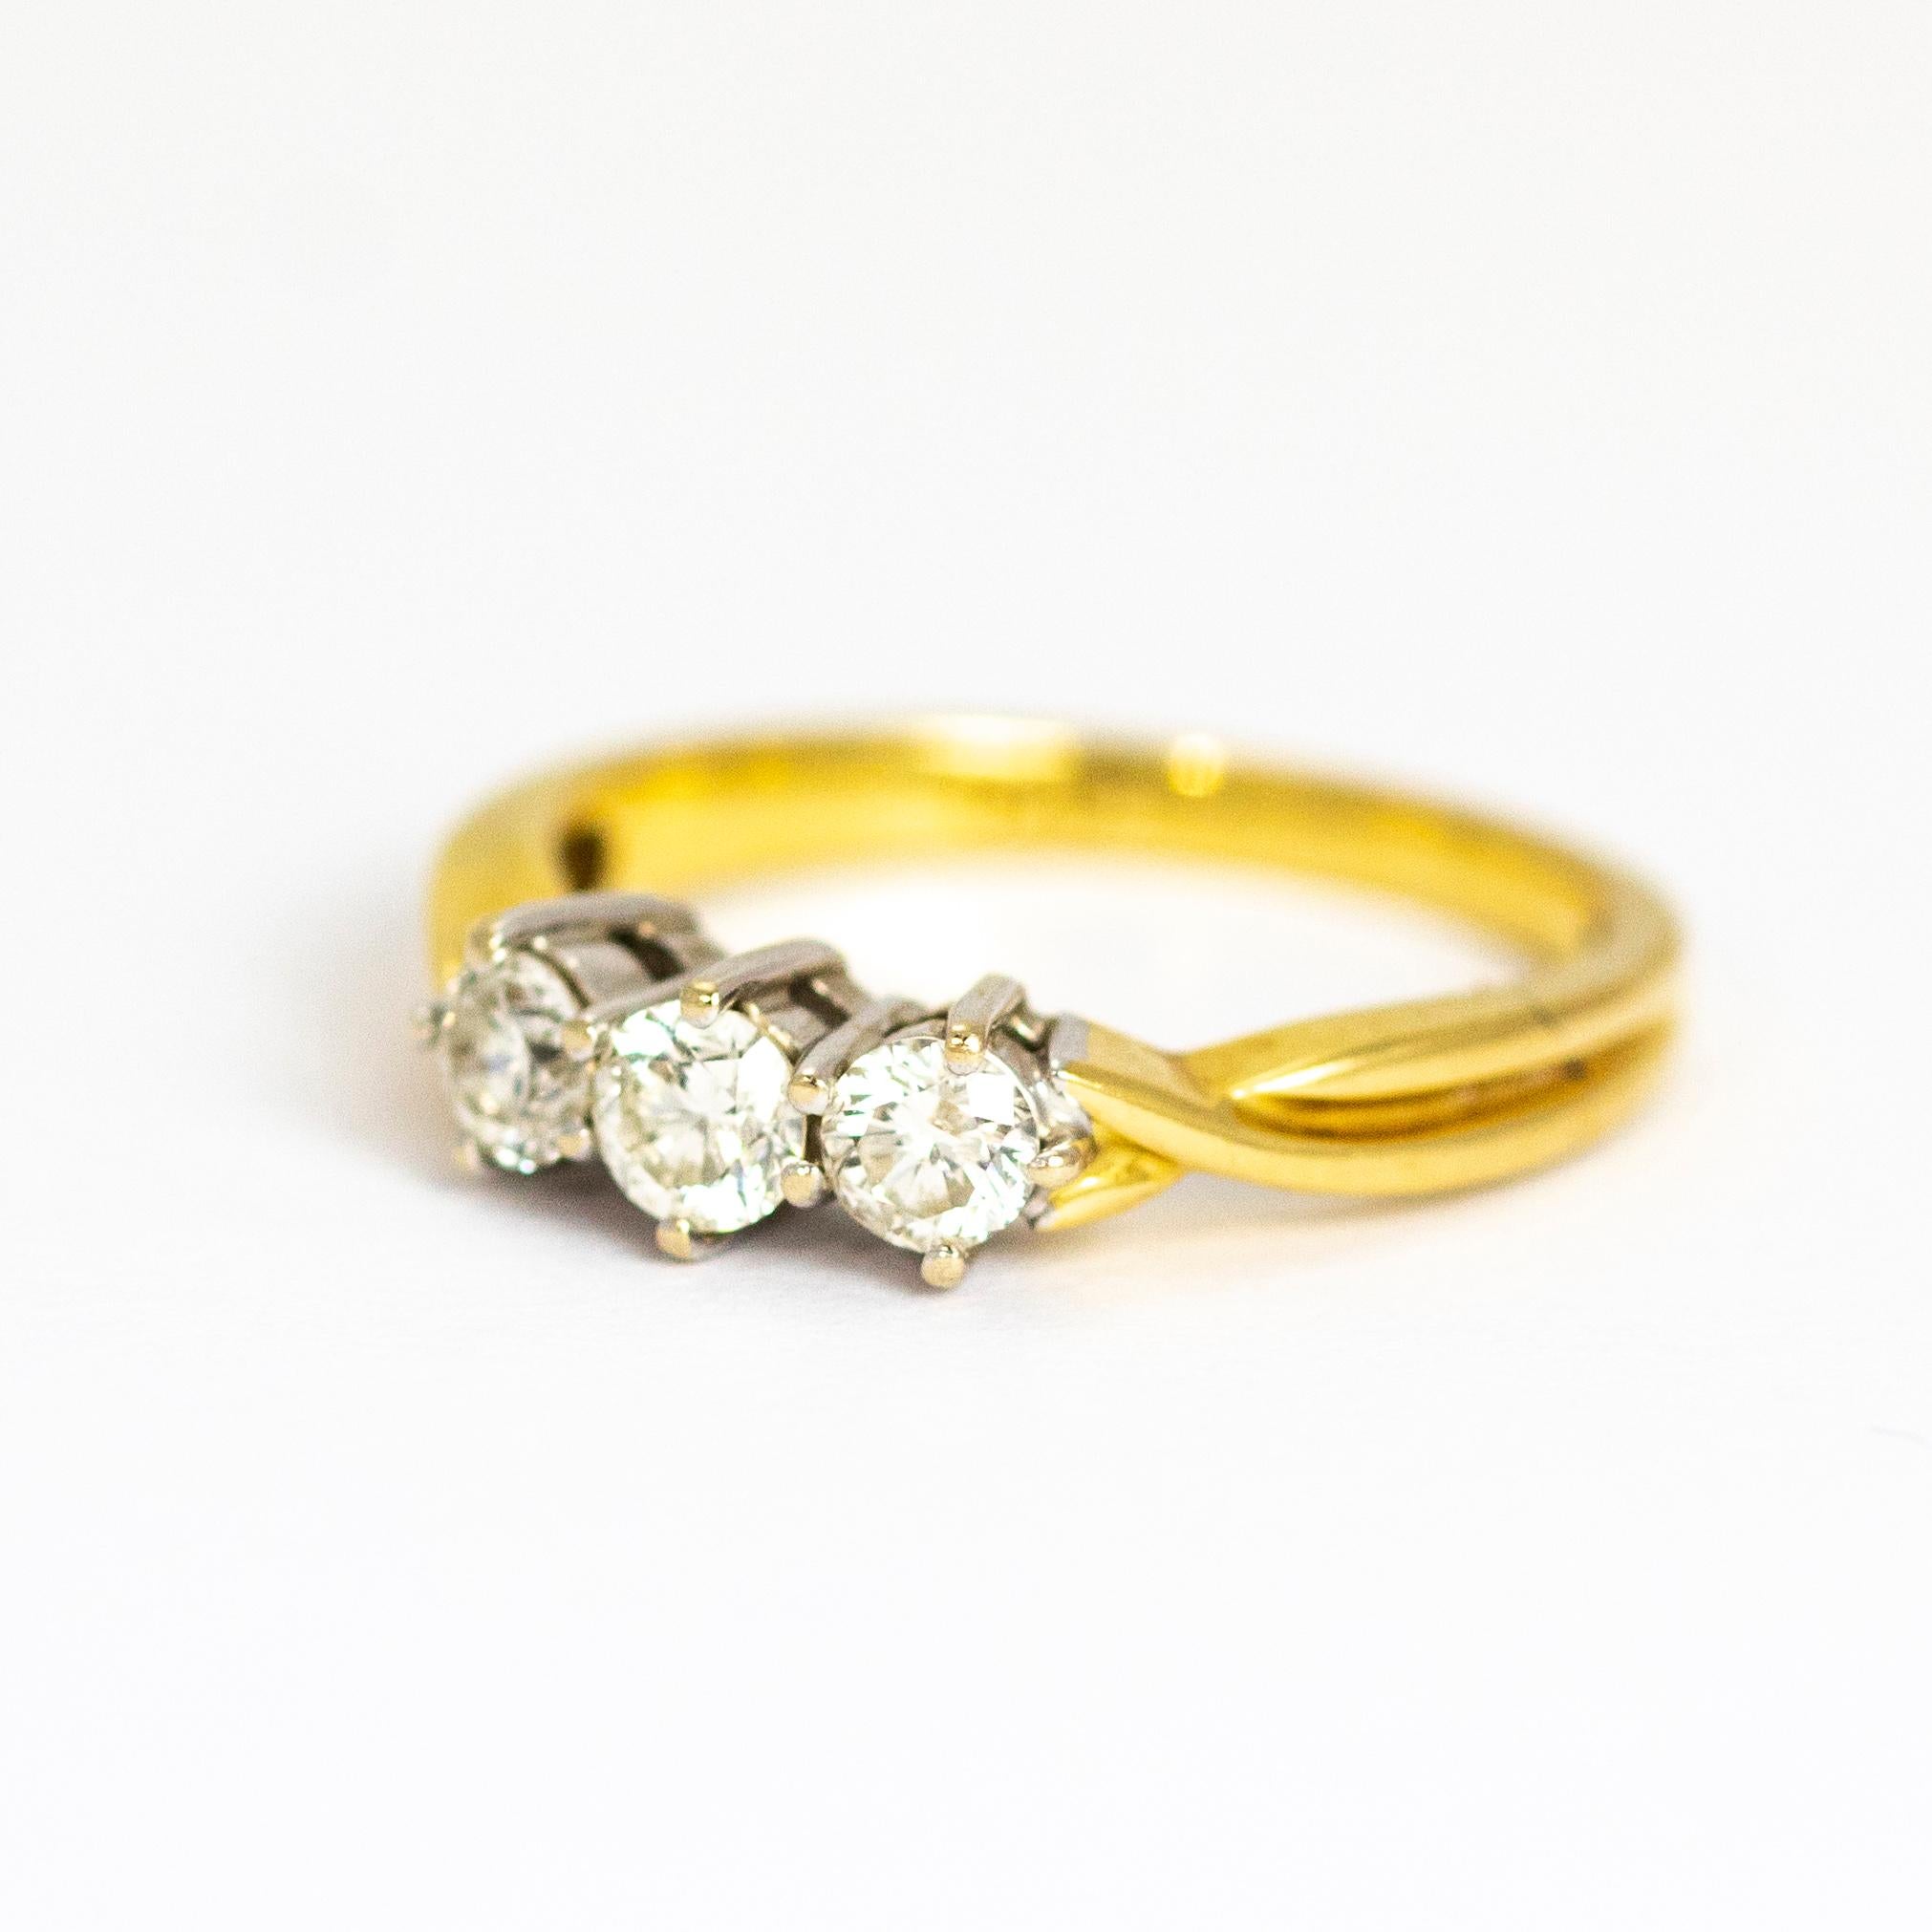 This vintage 18 Carat Gold and platinum beauty holds three bright diamonds with a total weight of 50pts and features twisted gold shoulders. Made in London, England. 

Ring Size: M or 6 1/4